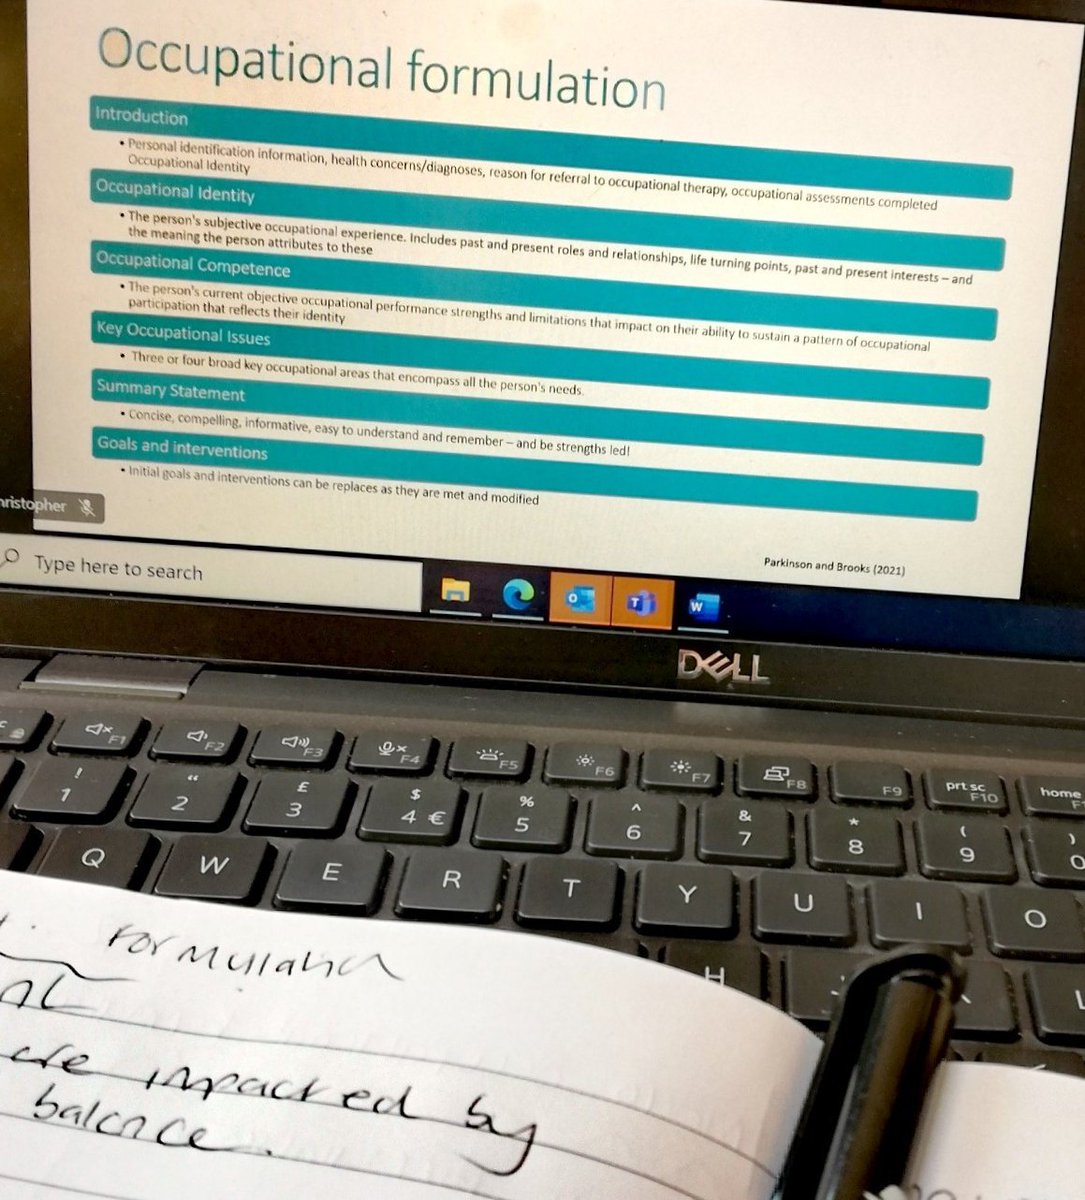 Excellent CPD session in Occupational Formulation, planning and goal setting yesterday. Perfect to implement into our #longcovidservice. Great to see some familiar faces too :)
@LSCFT_OTs
@LSCFTAHPs
#MOHO #cpd #activityanalysis #OccupationalTherapy #personcentred